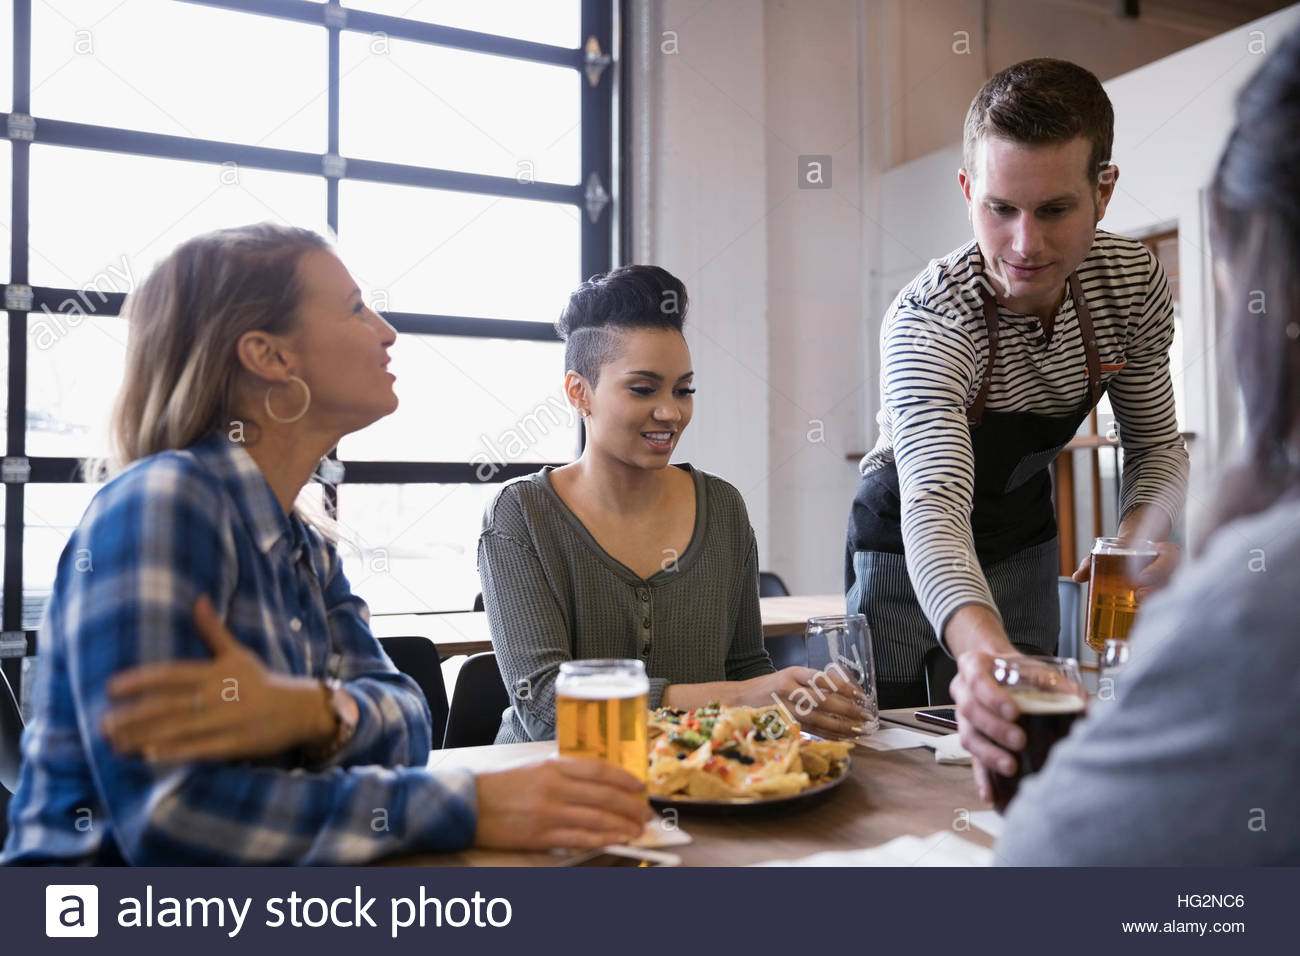 Waiter serving beers to women friends at brewery restaurant table Stock Photo